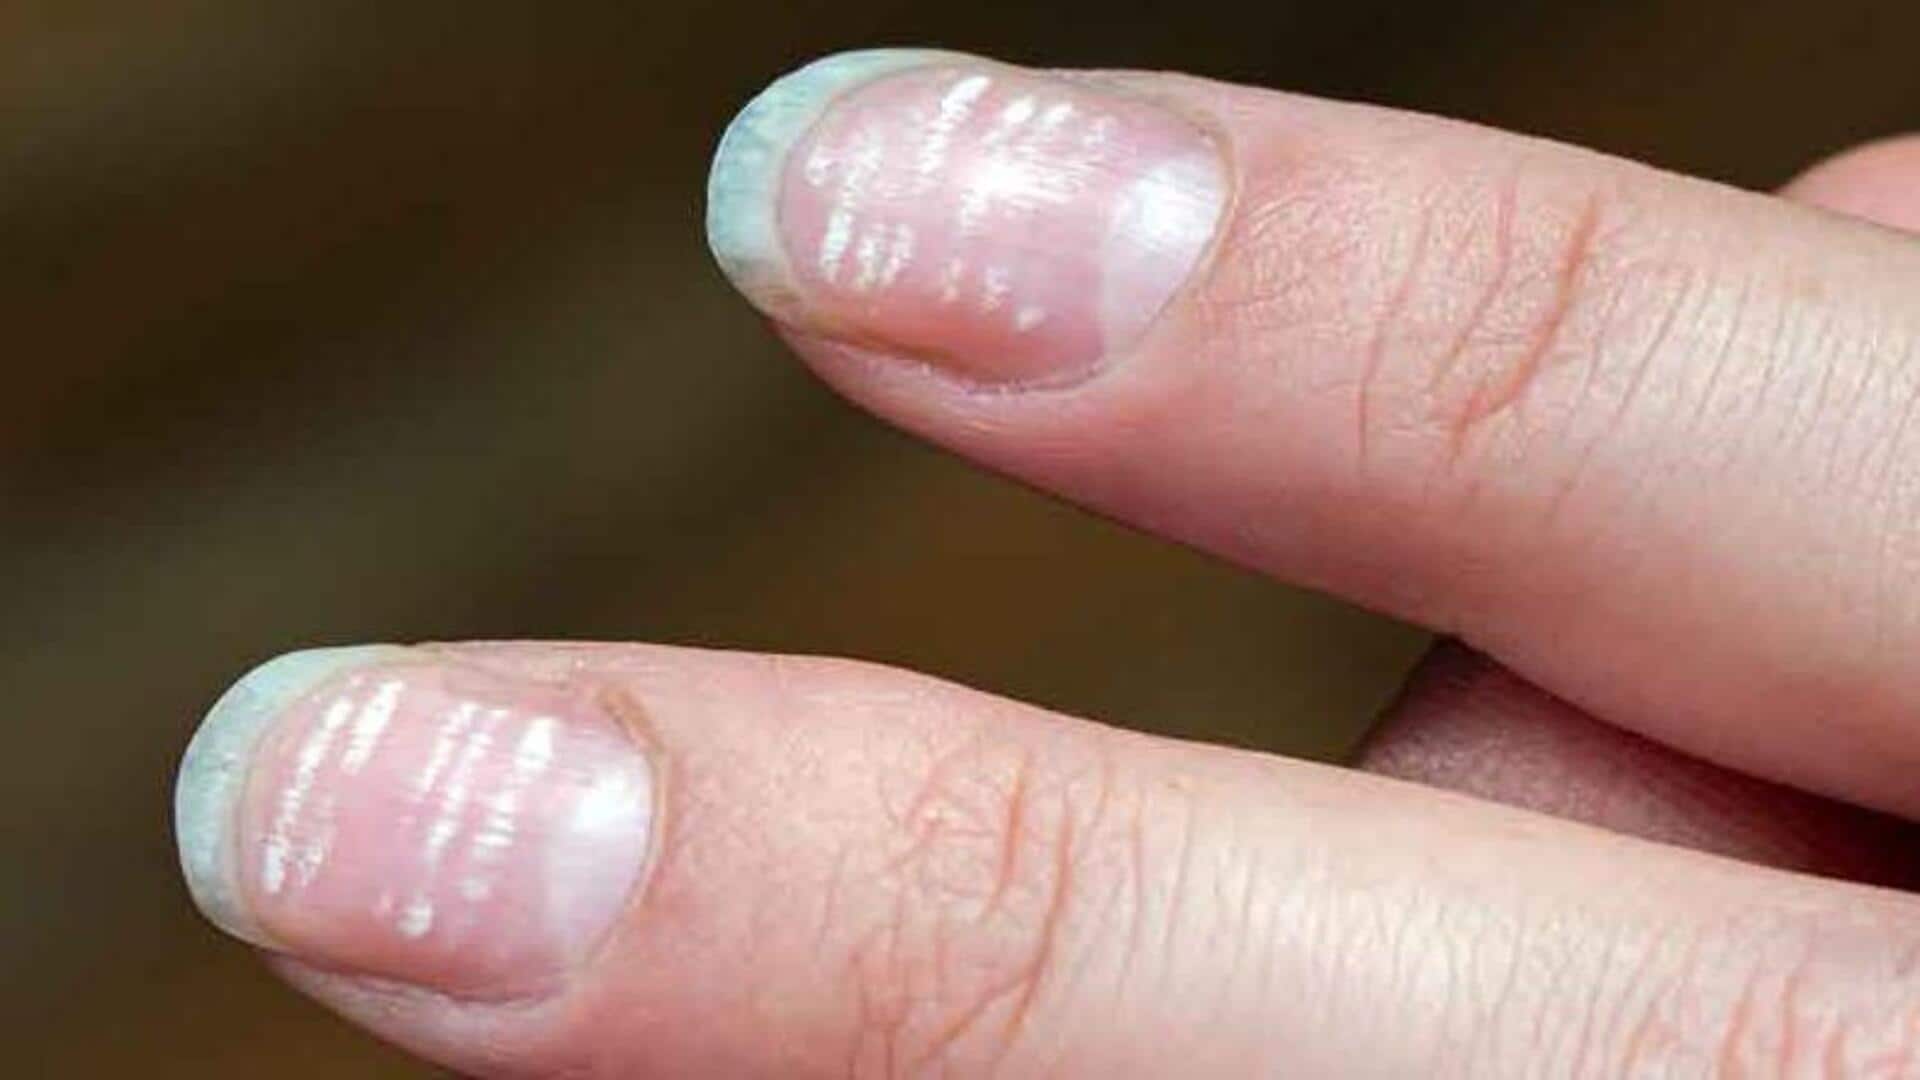 Here's what the white spots on your nails indicate 